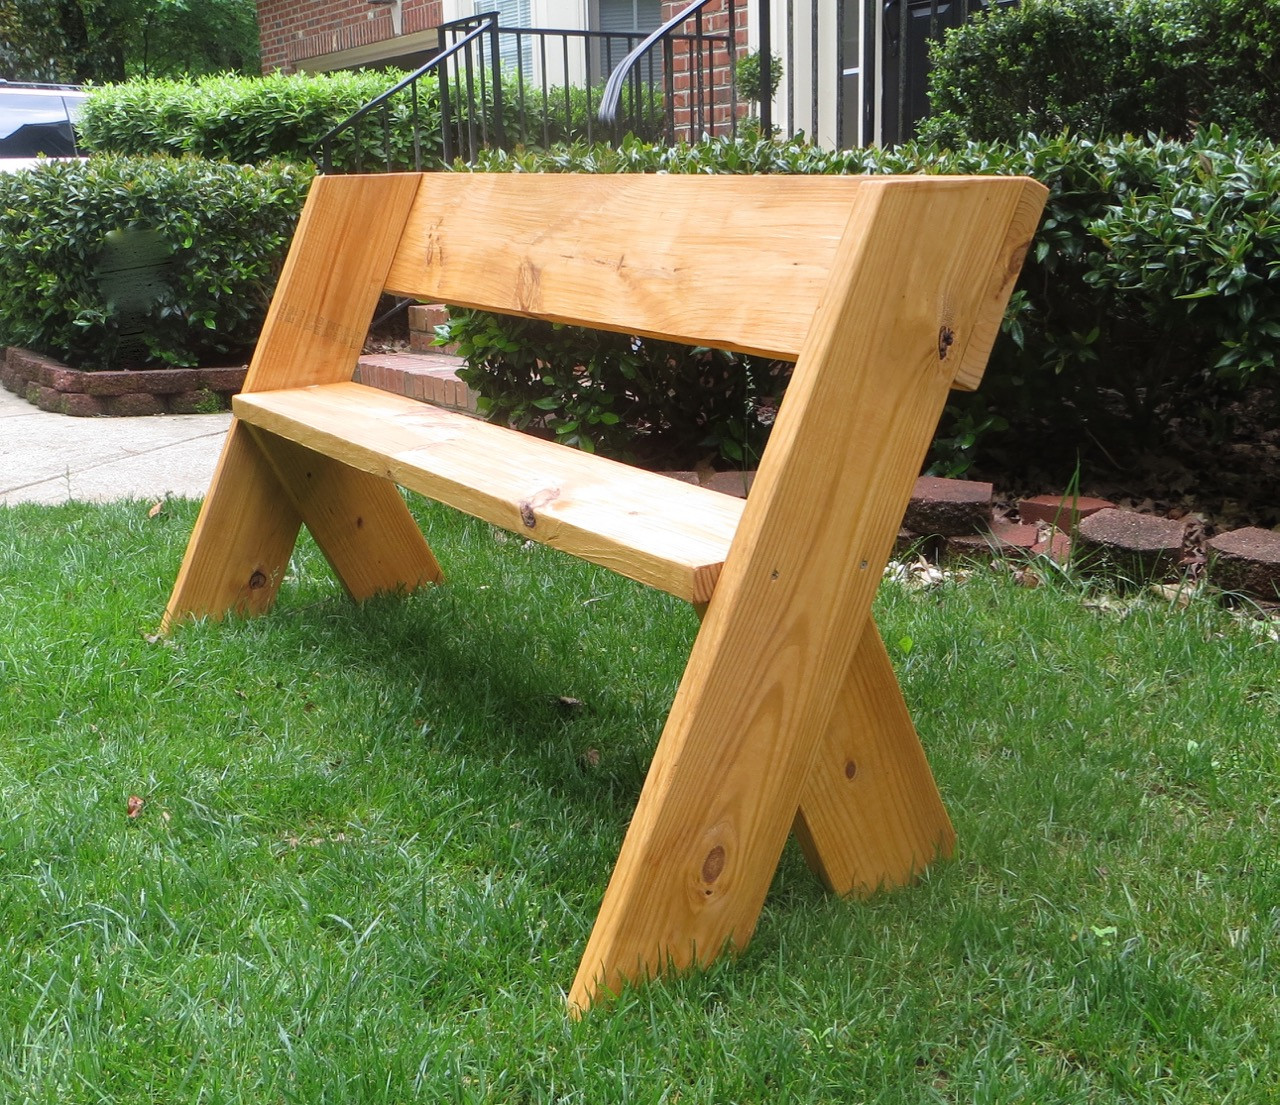 DIY Benches Outdoor
 The Project Lady DIY Tutorial – $16 Simple Outdoor Wood